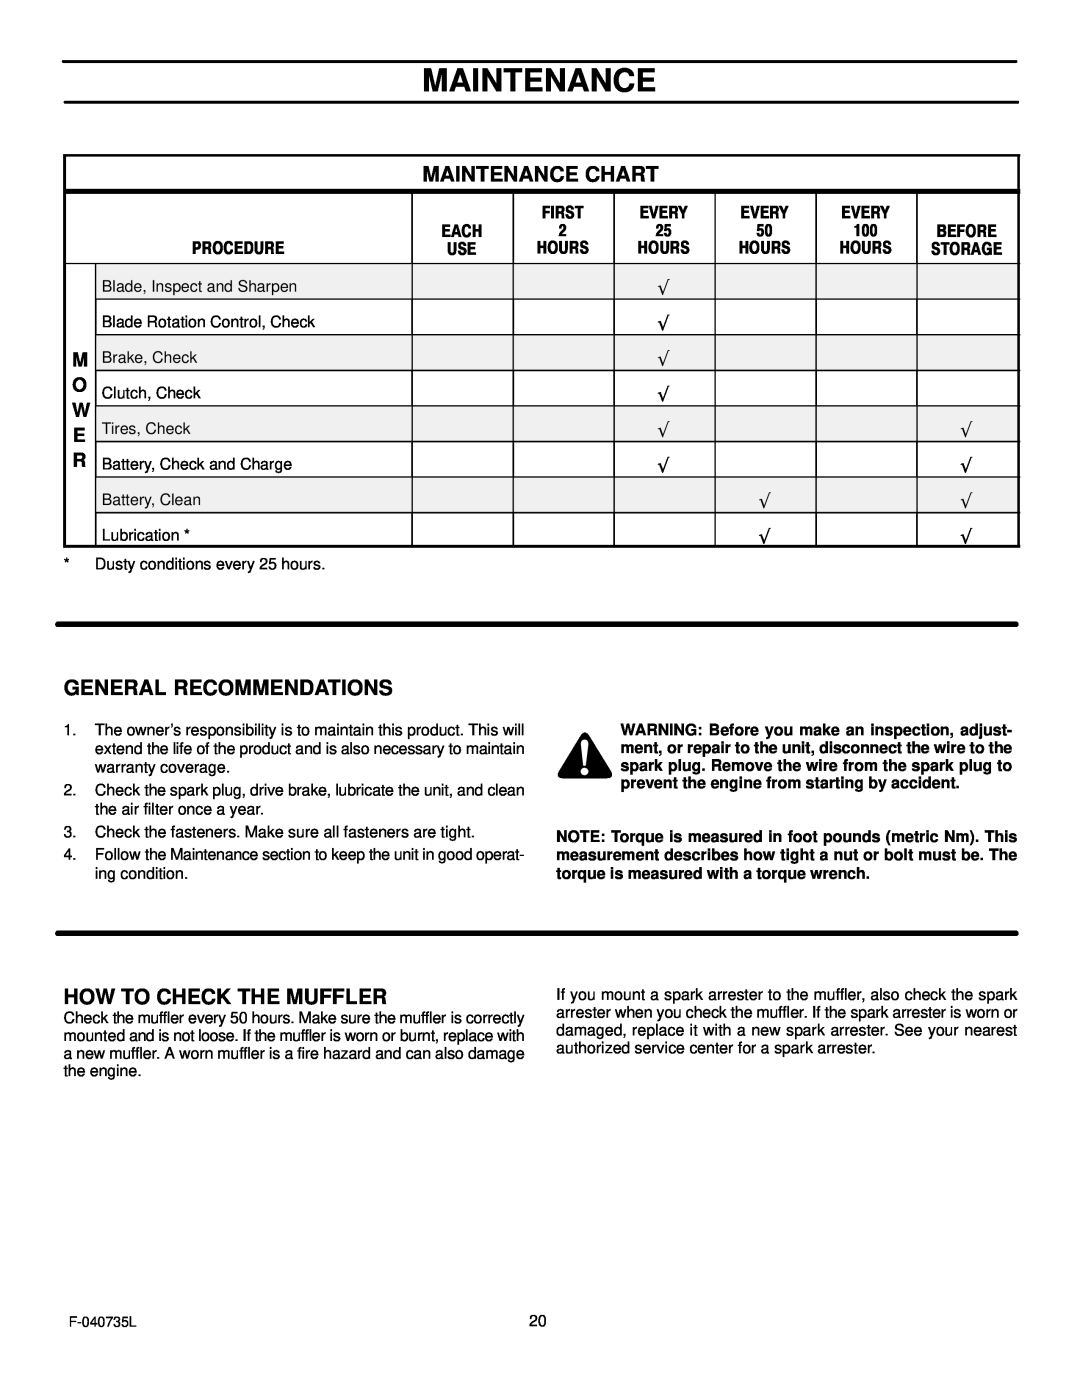 Murray 405000x8C manual Maintenance Chart, General Recommendations, How To Check The Muffler 